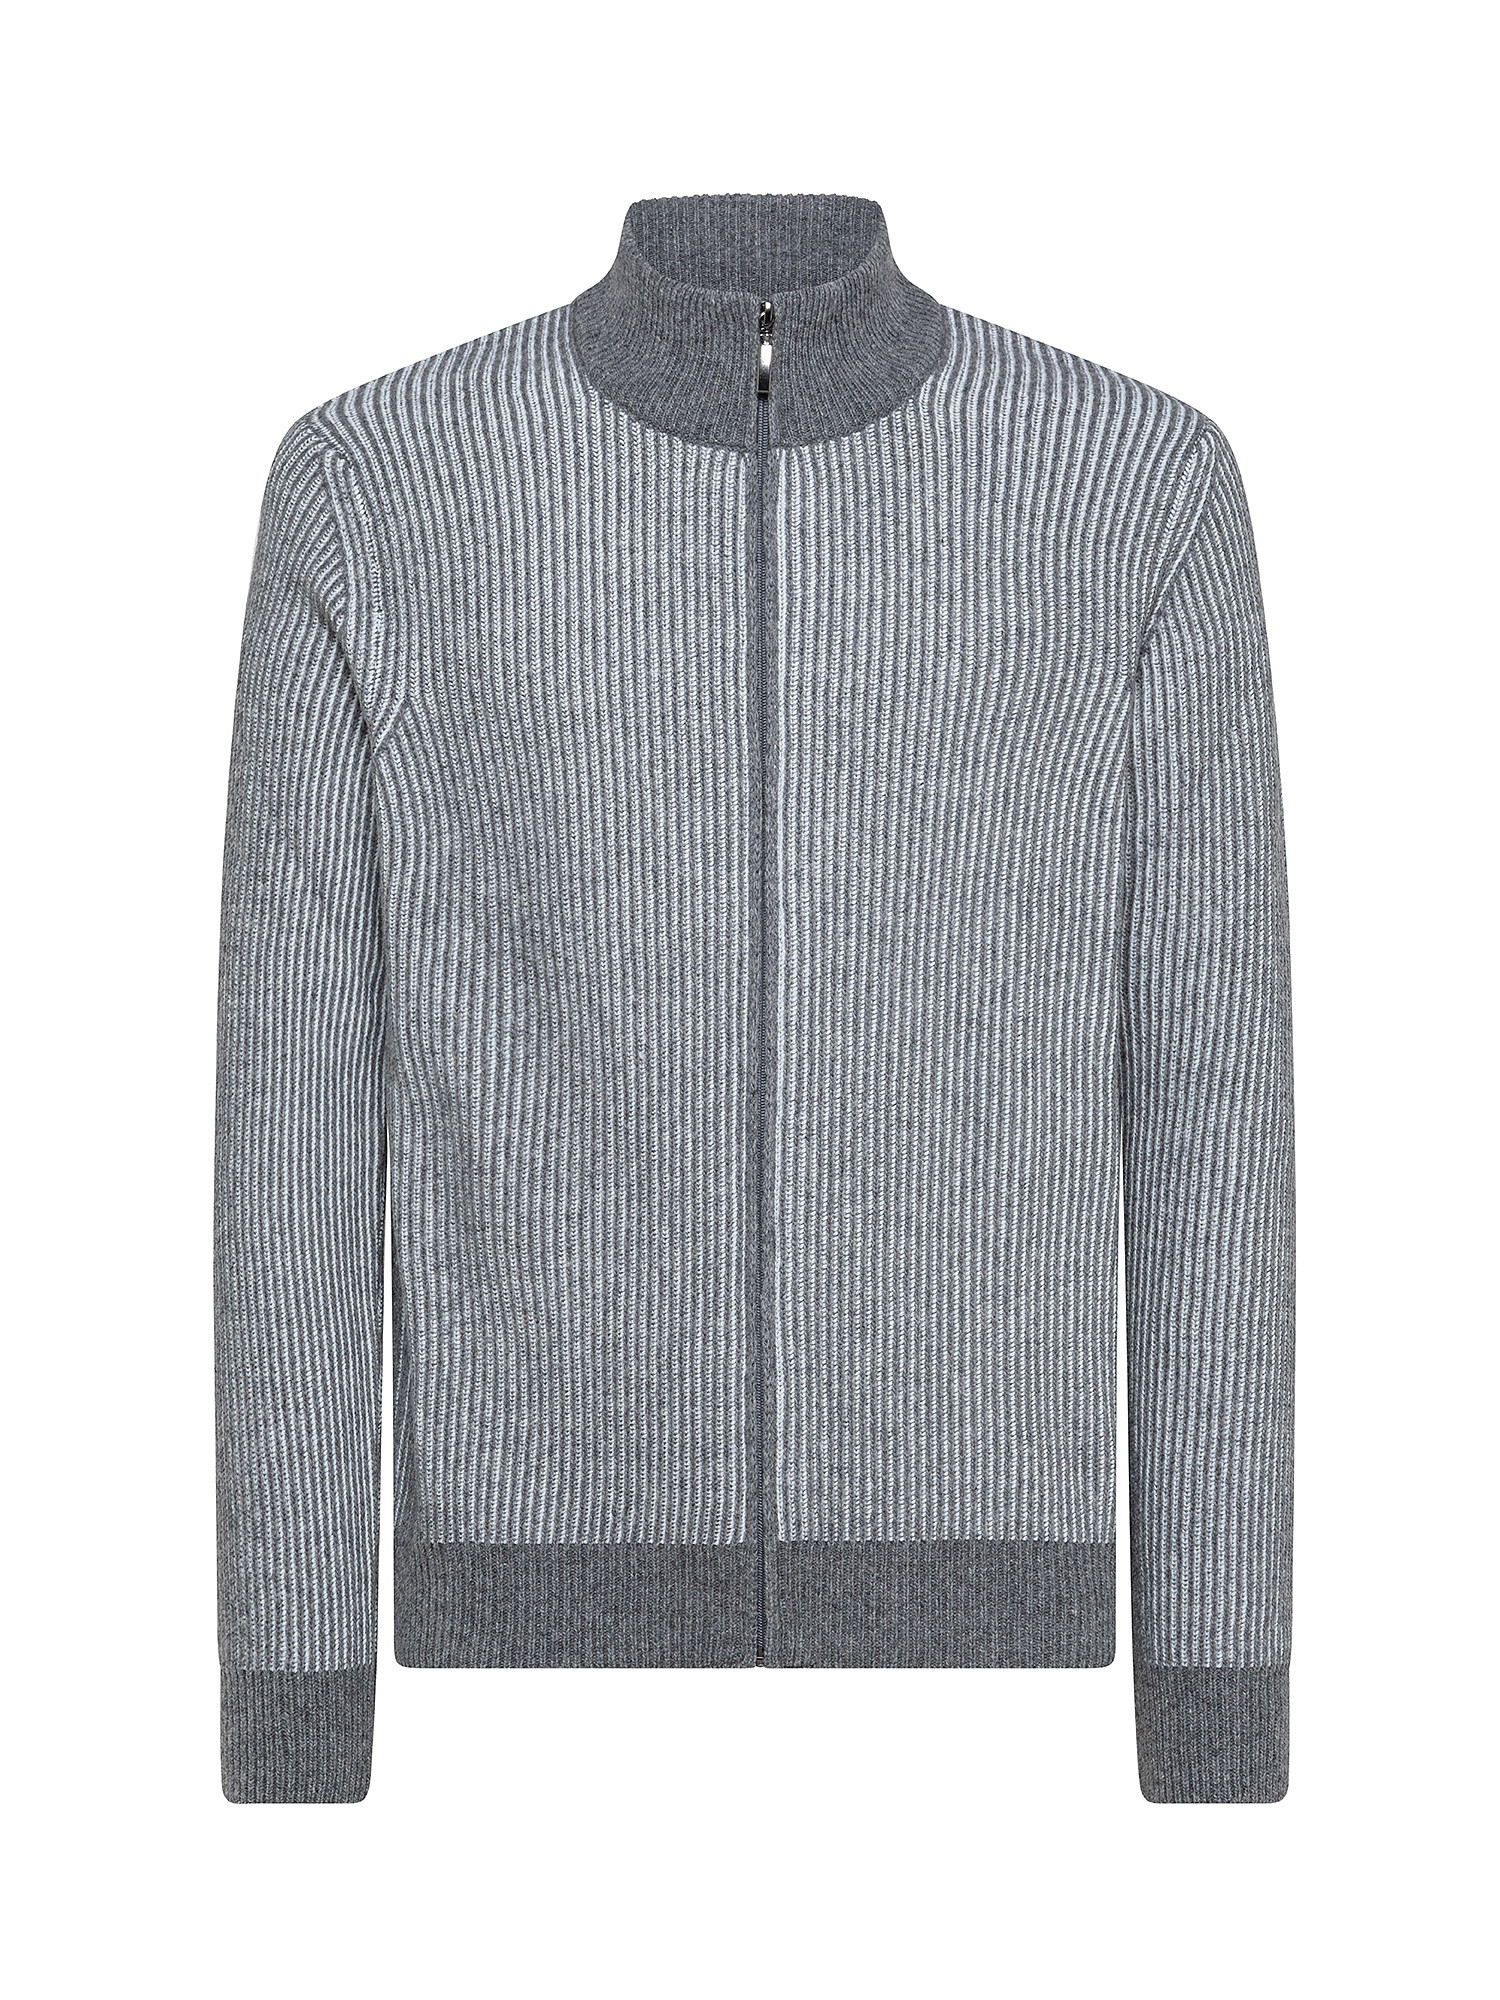 Giacca full zip, Grigio, large image number 0